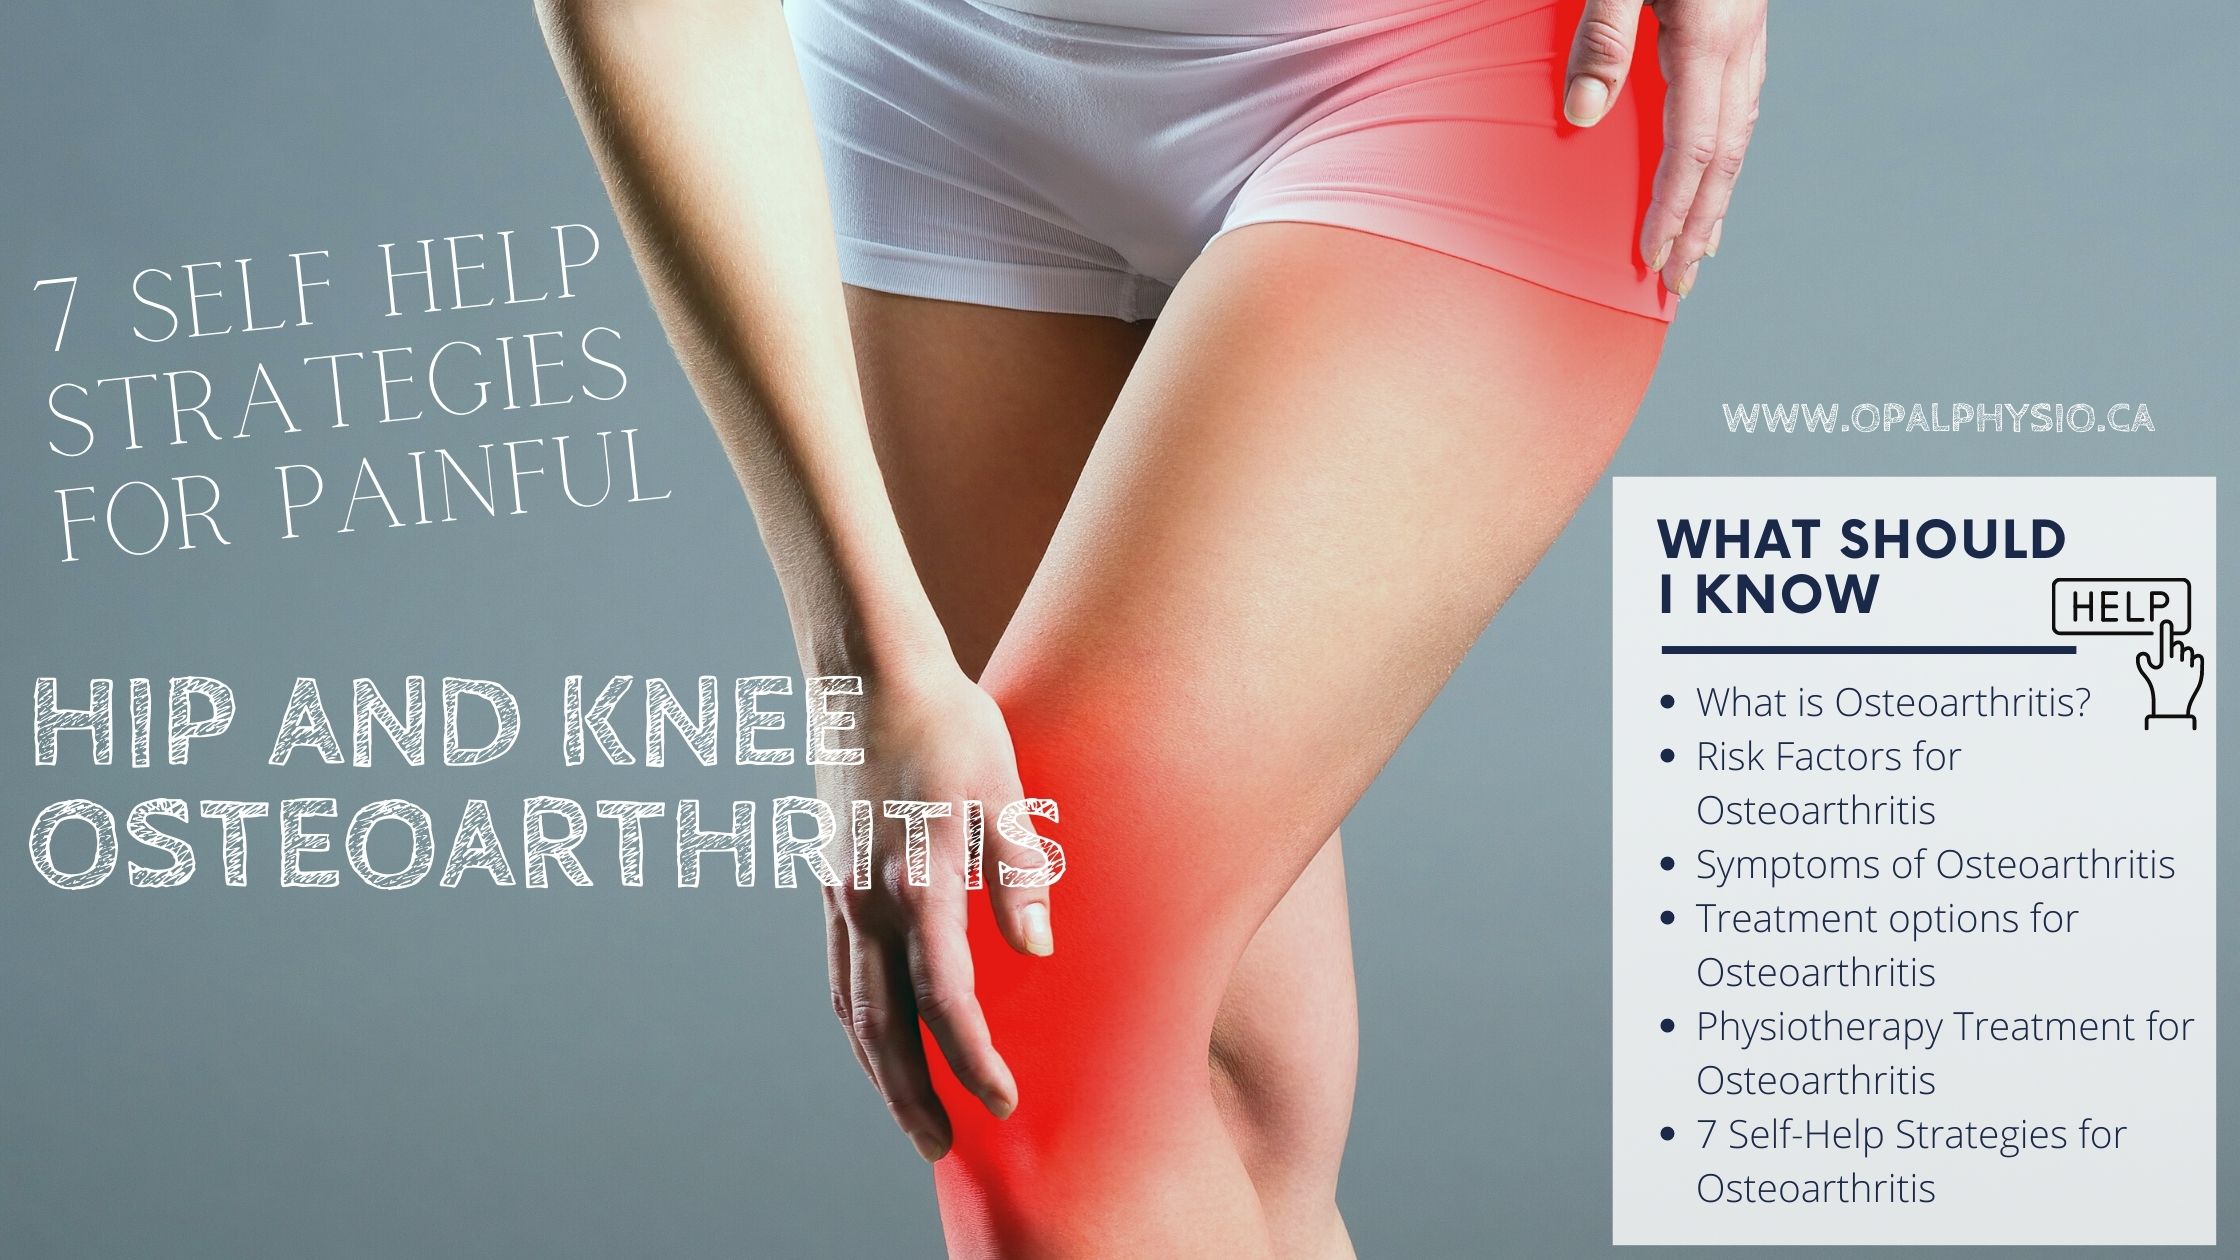 Hip and Knee Pain Relief with Physical Therapy